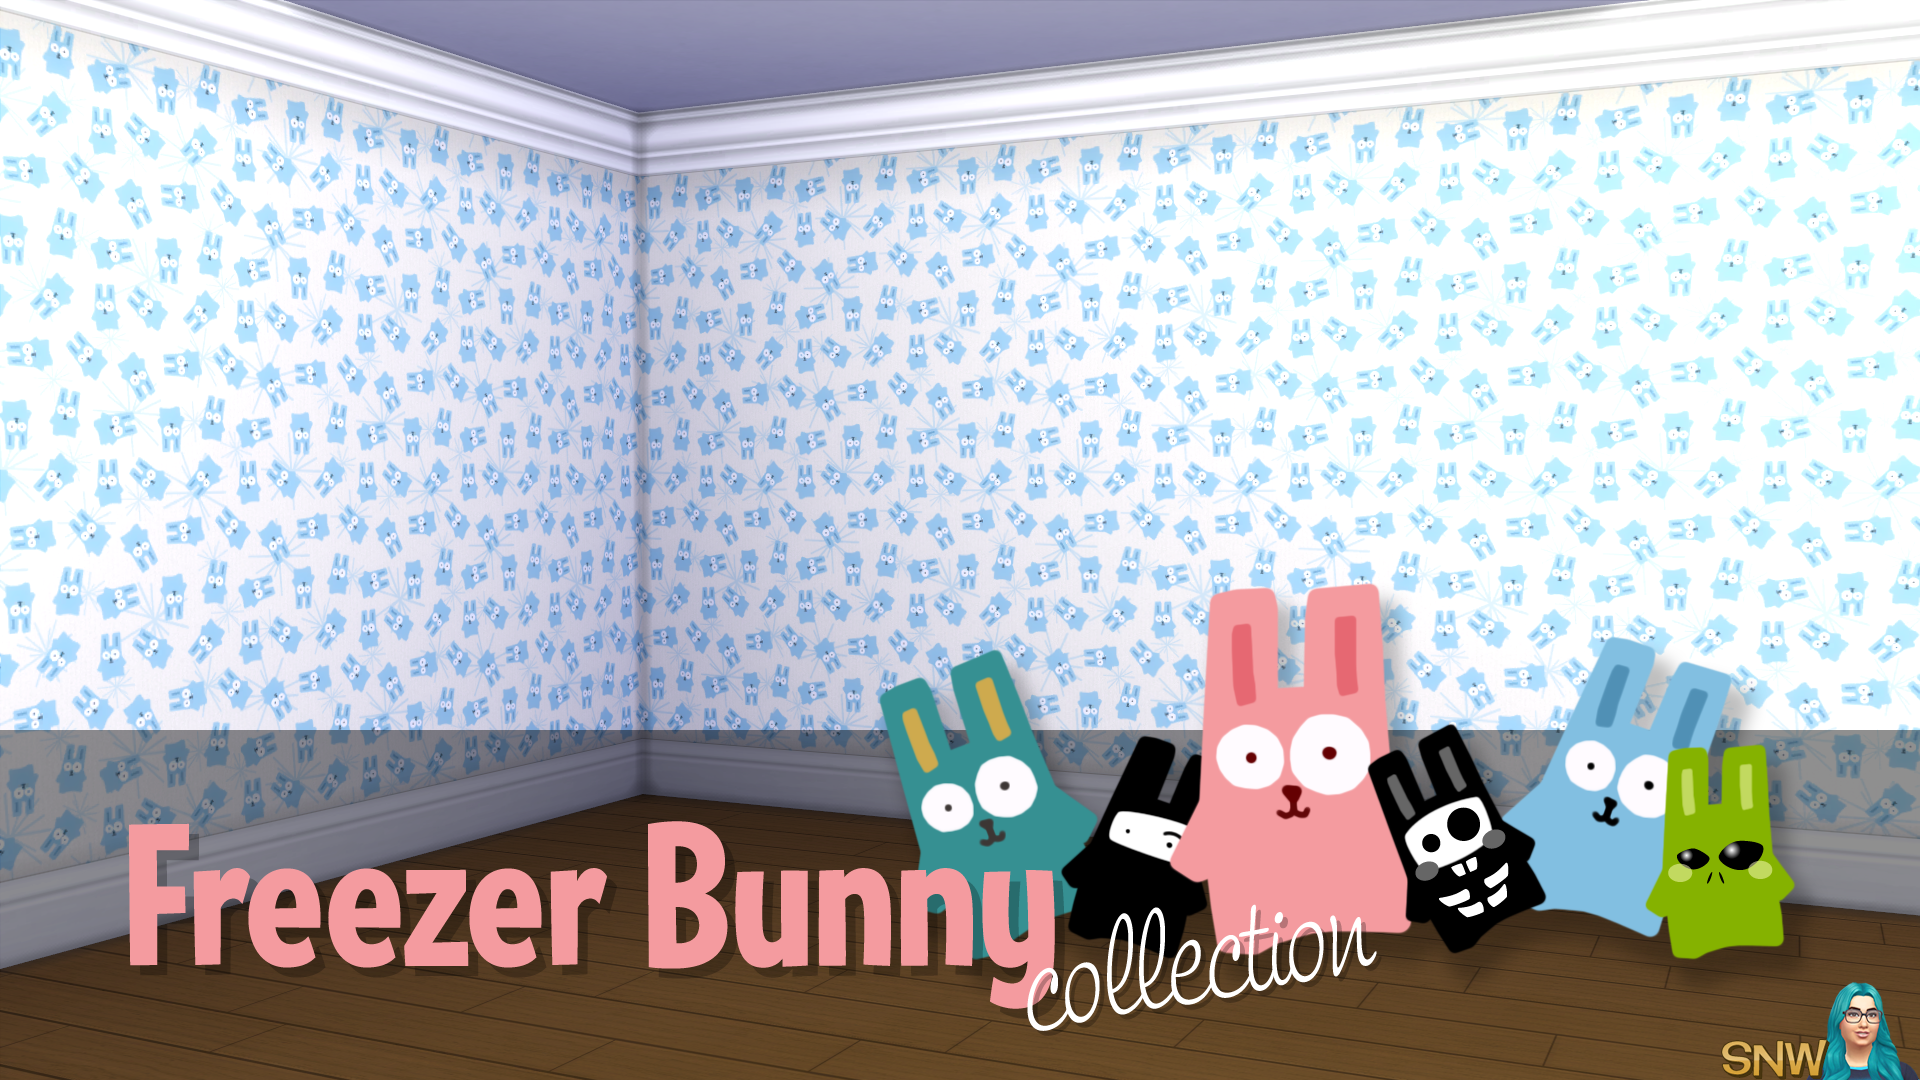 Freezer Bunny Collection: Small Bunnies/Starburst Wallpapers